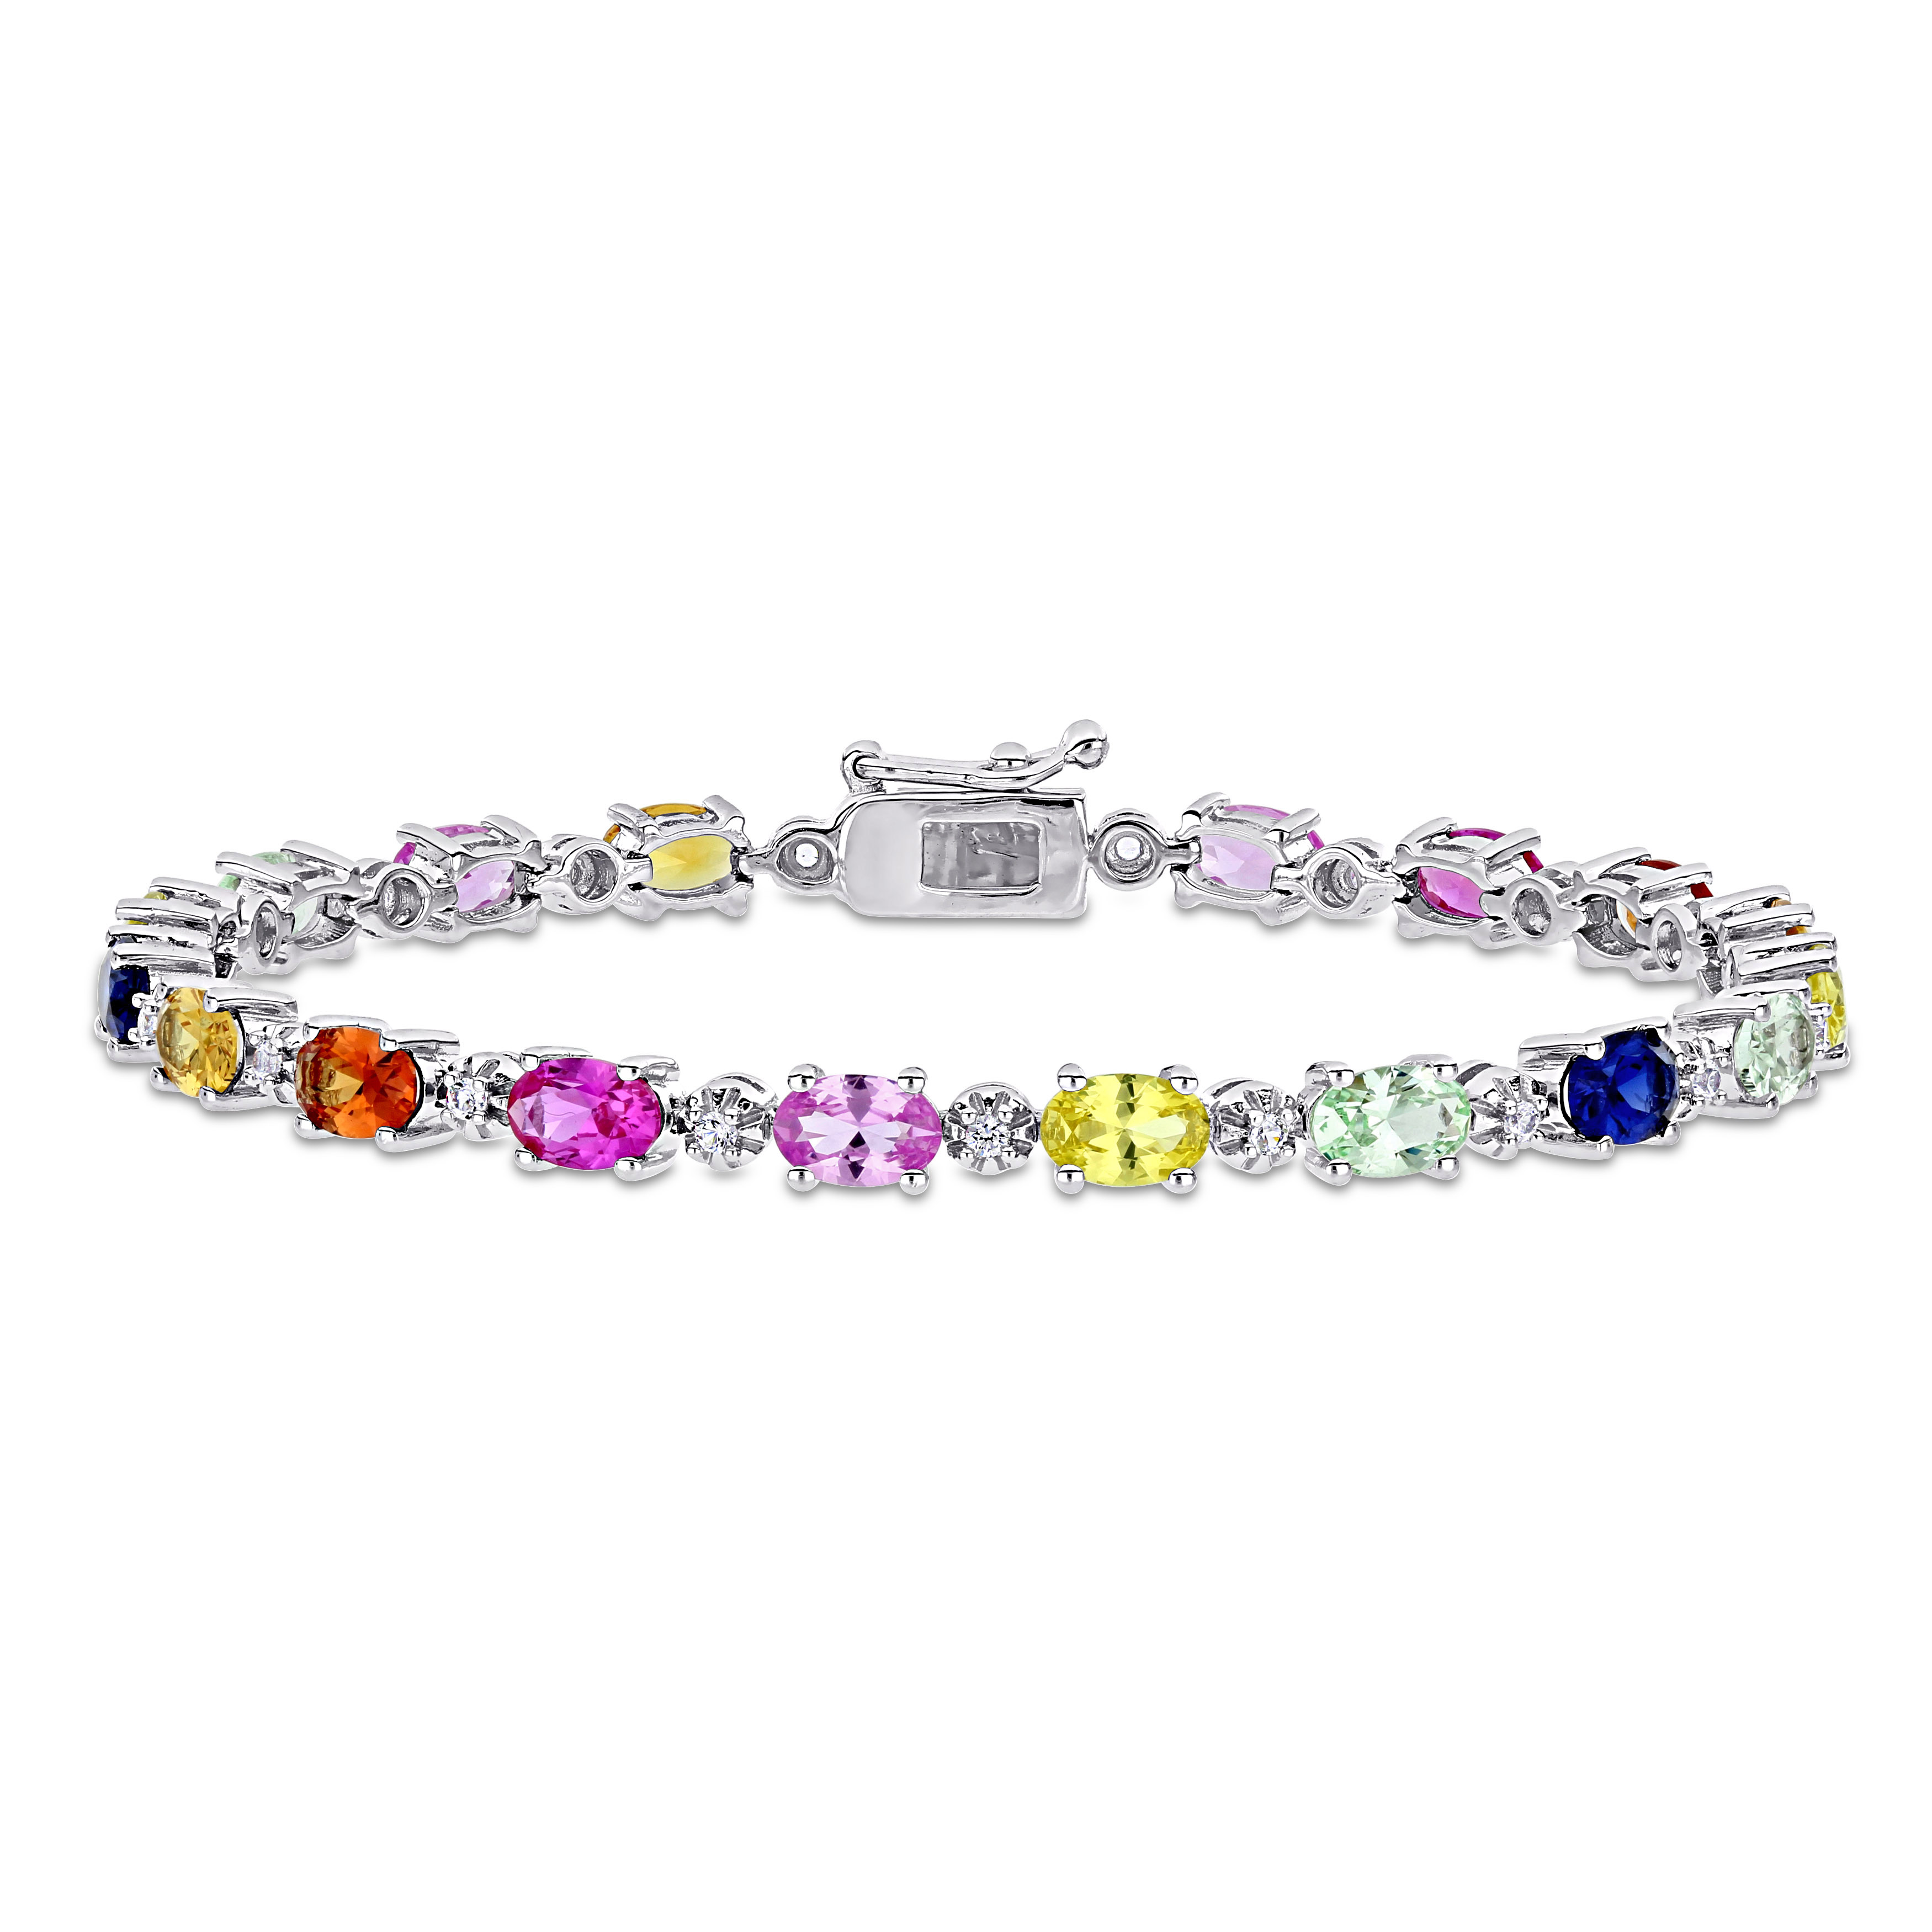 10 1/4 CT TGW Multi-Color Created Sapphire Tennis Bracelet in Sterling Silver - 7 in.